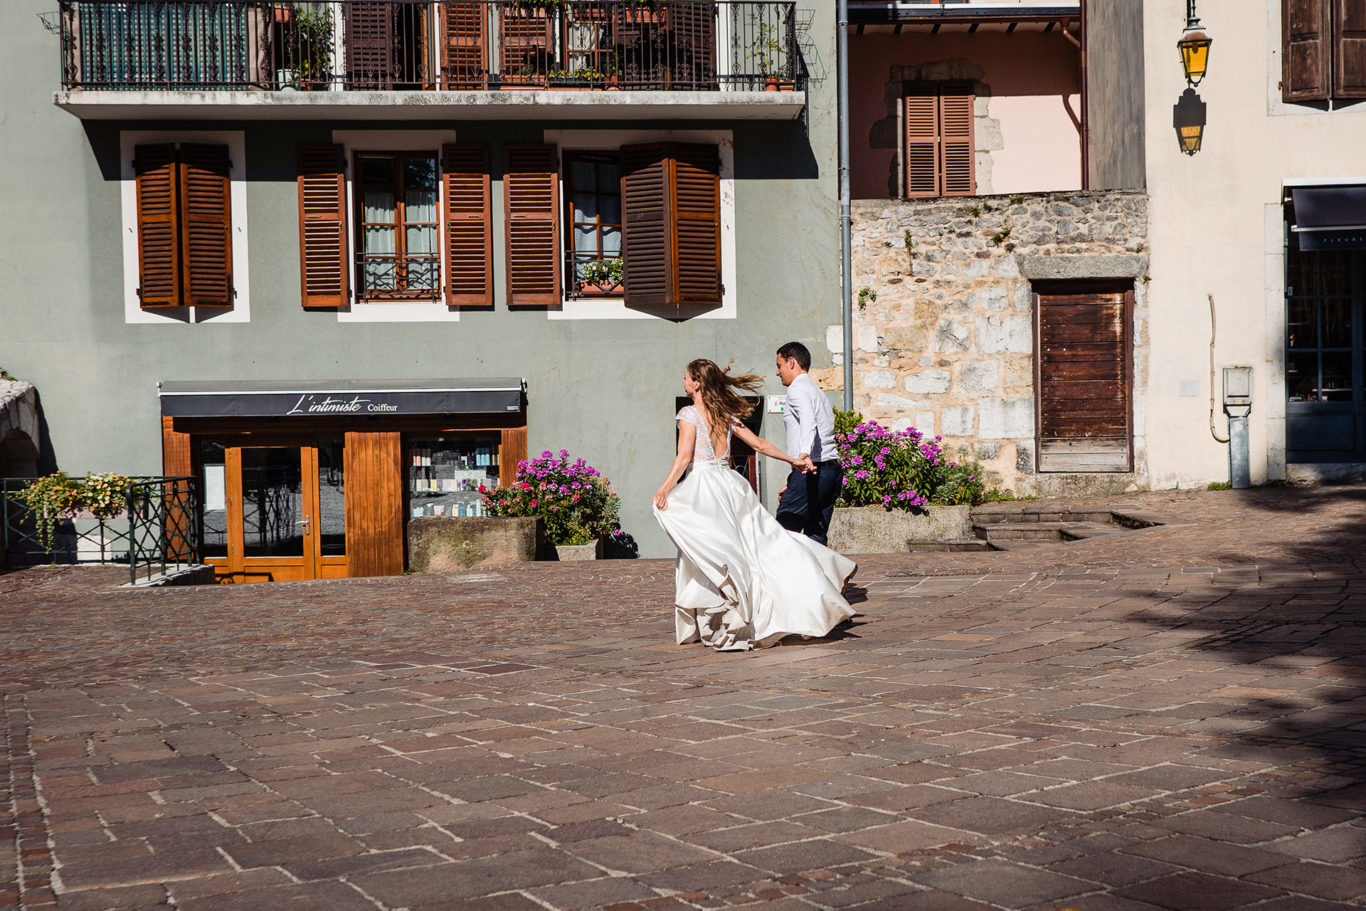 Love the Dress - Annecy Town - Mihaela & Guillame